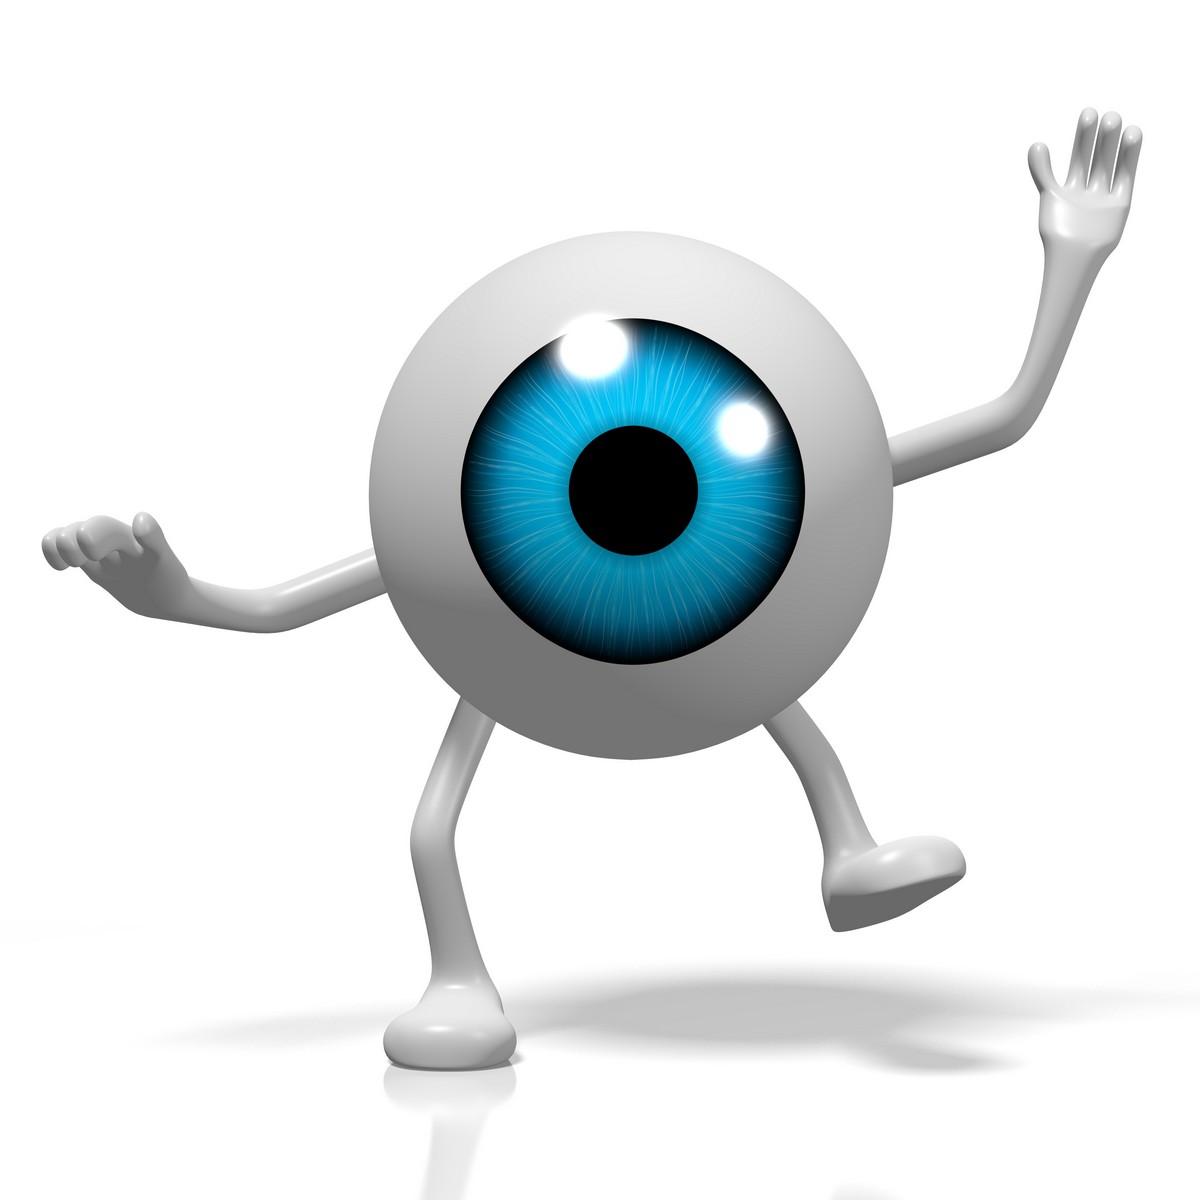 Blue eyeball waving with hands and feet